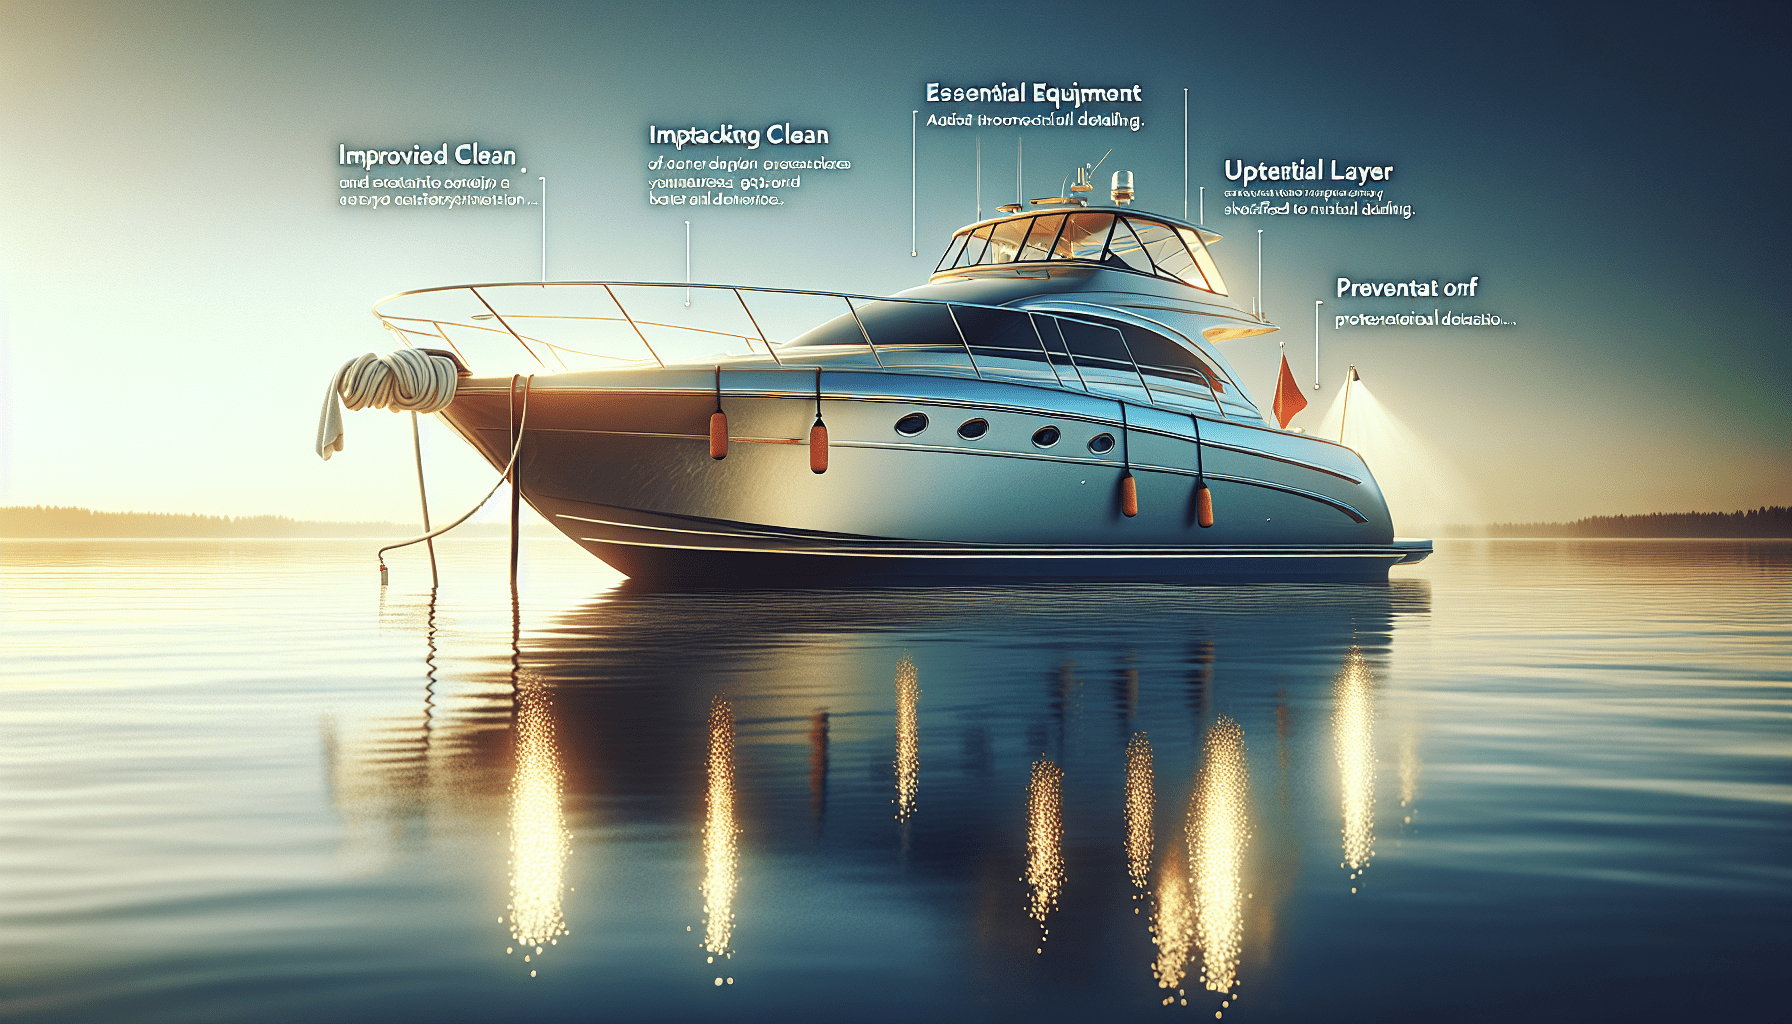 what are the top 4 benefits of boat detailing for enhancing onboard safety